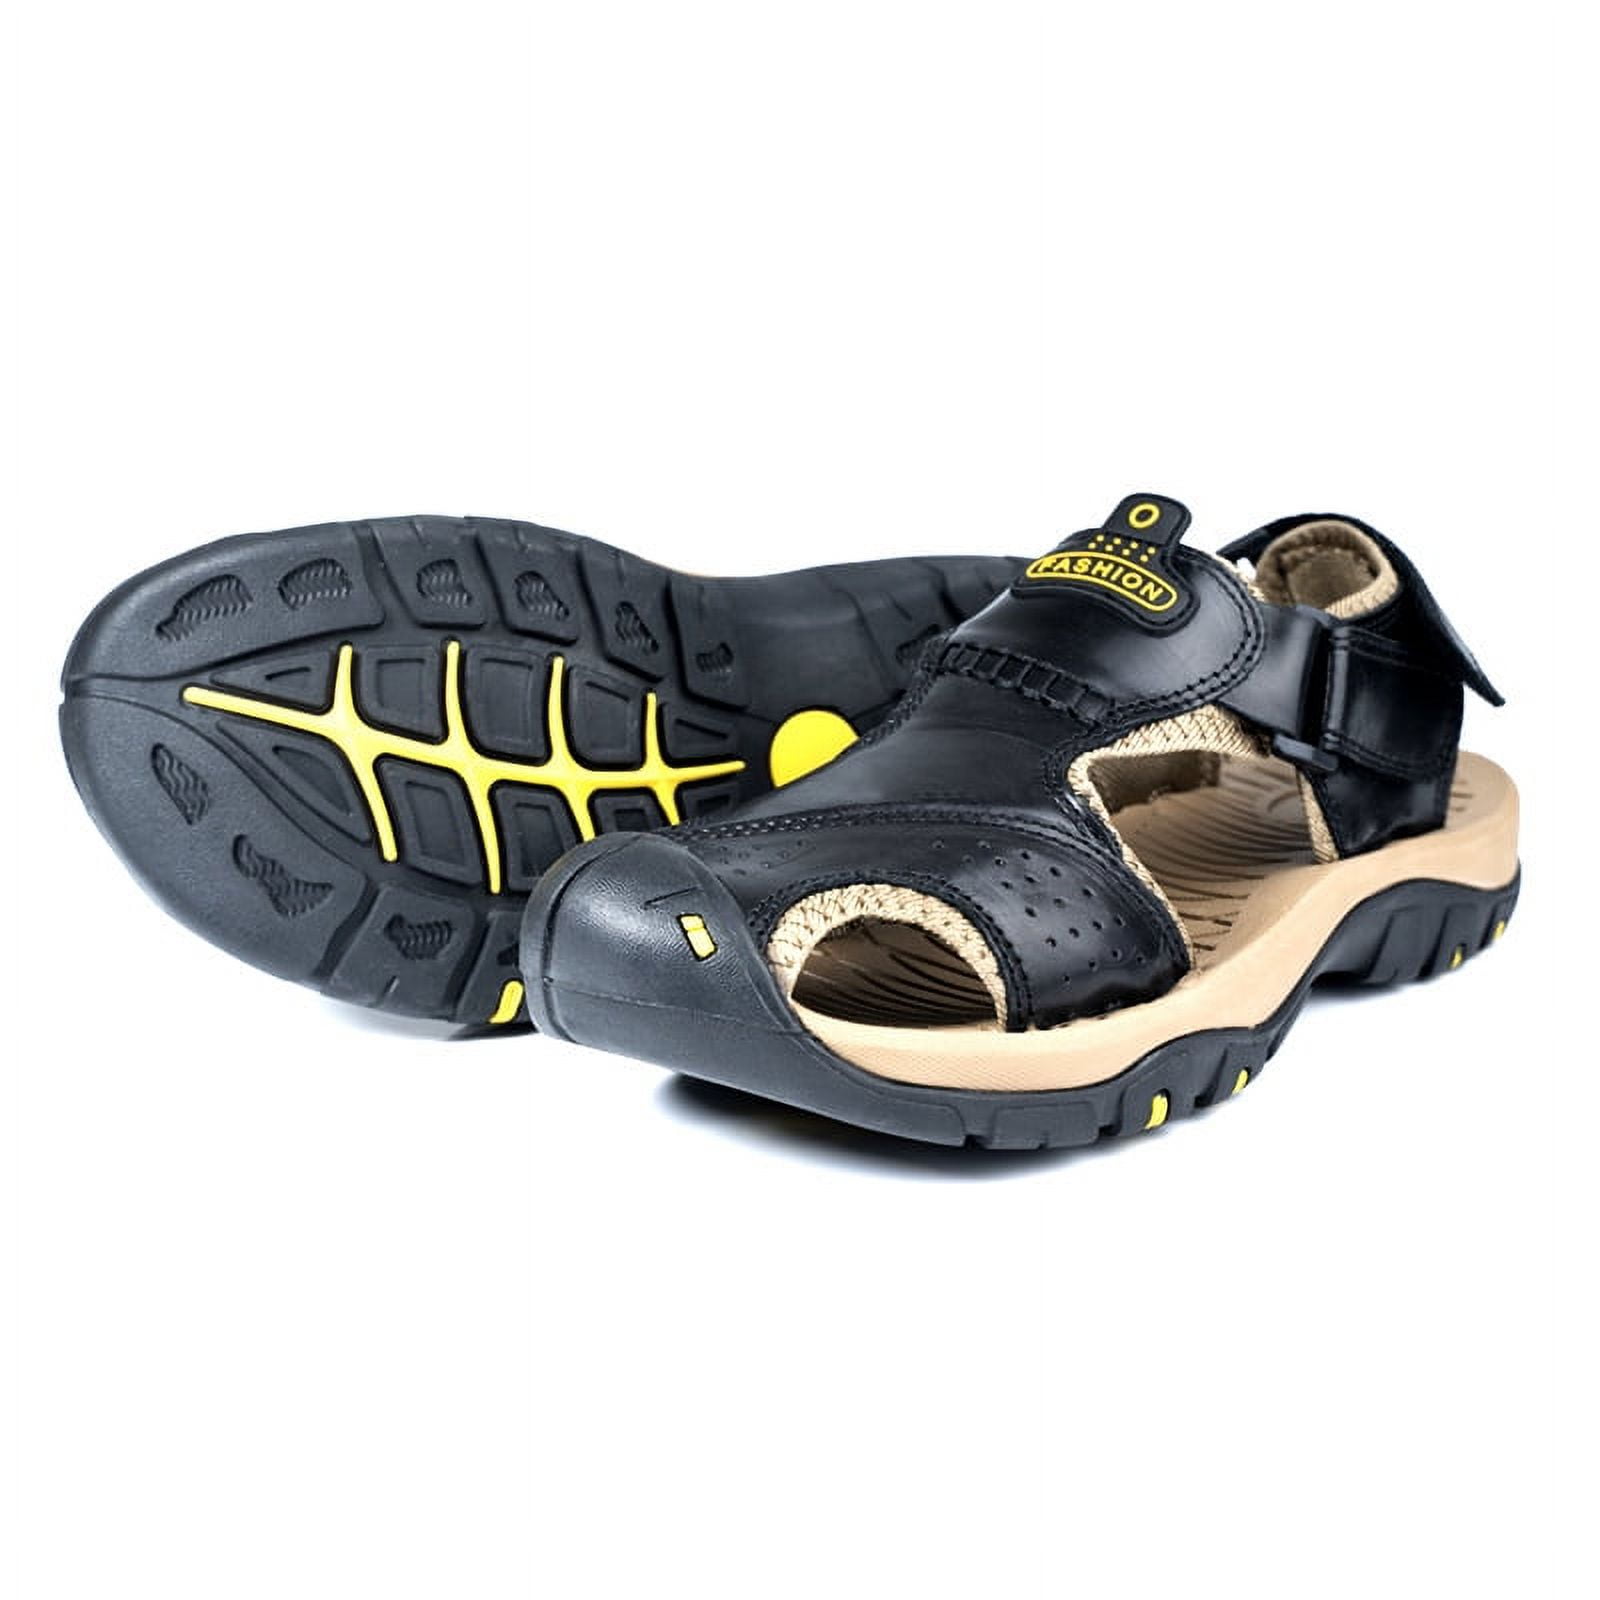 Men's Beach Sandals Outdoor Hiking Sandals Closed Toe Leather Athletic ...